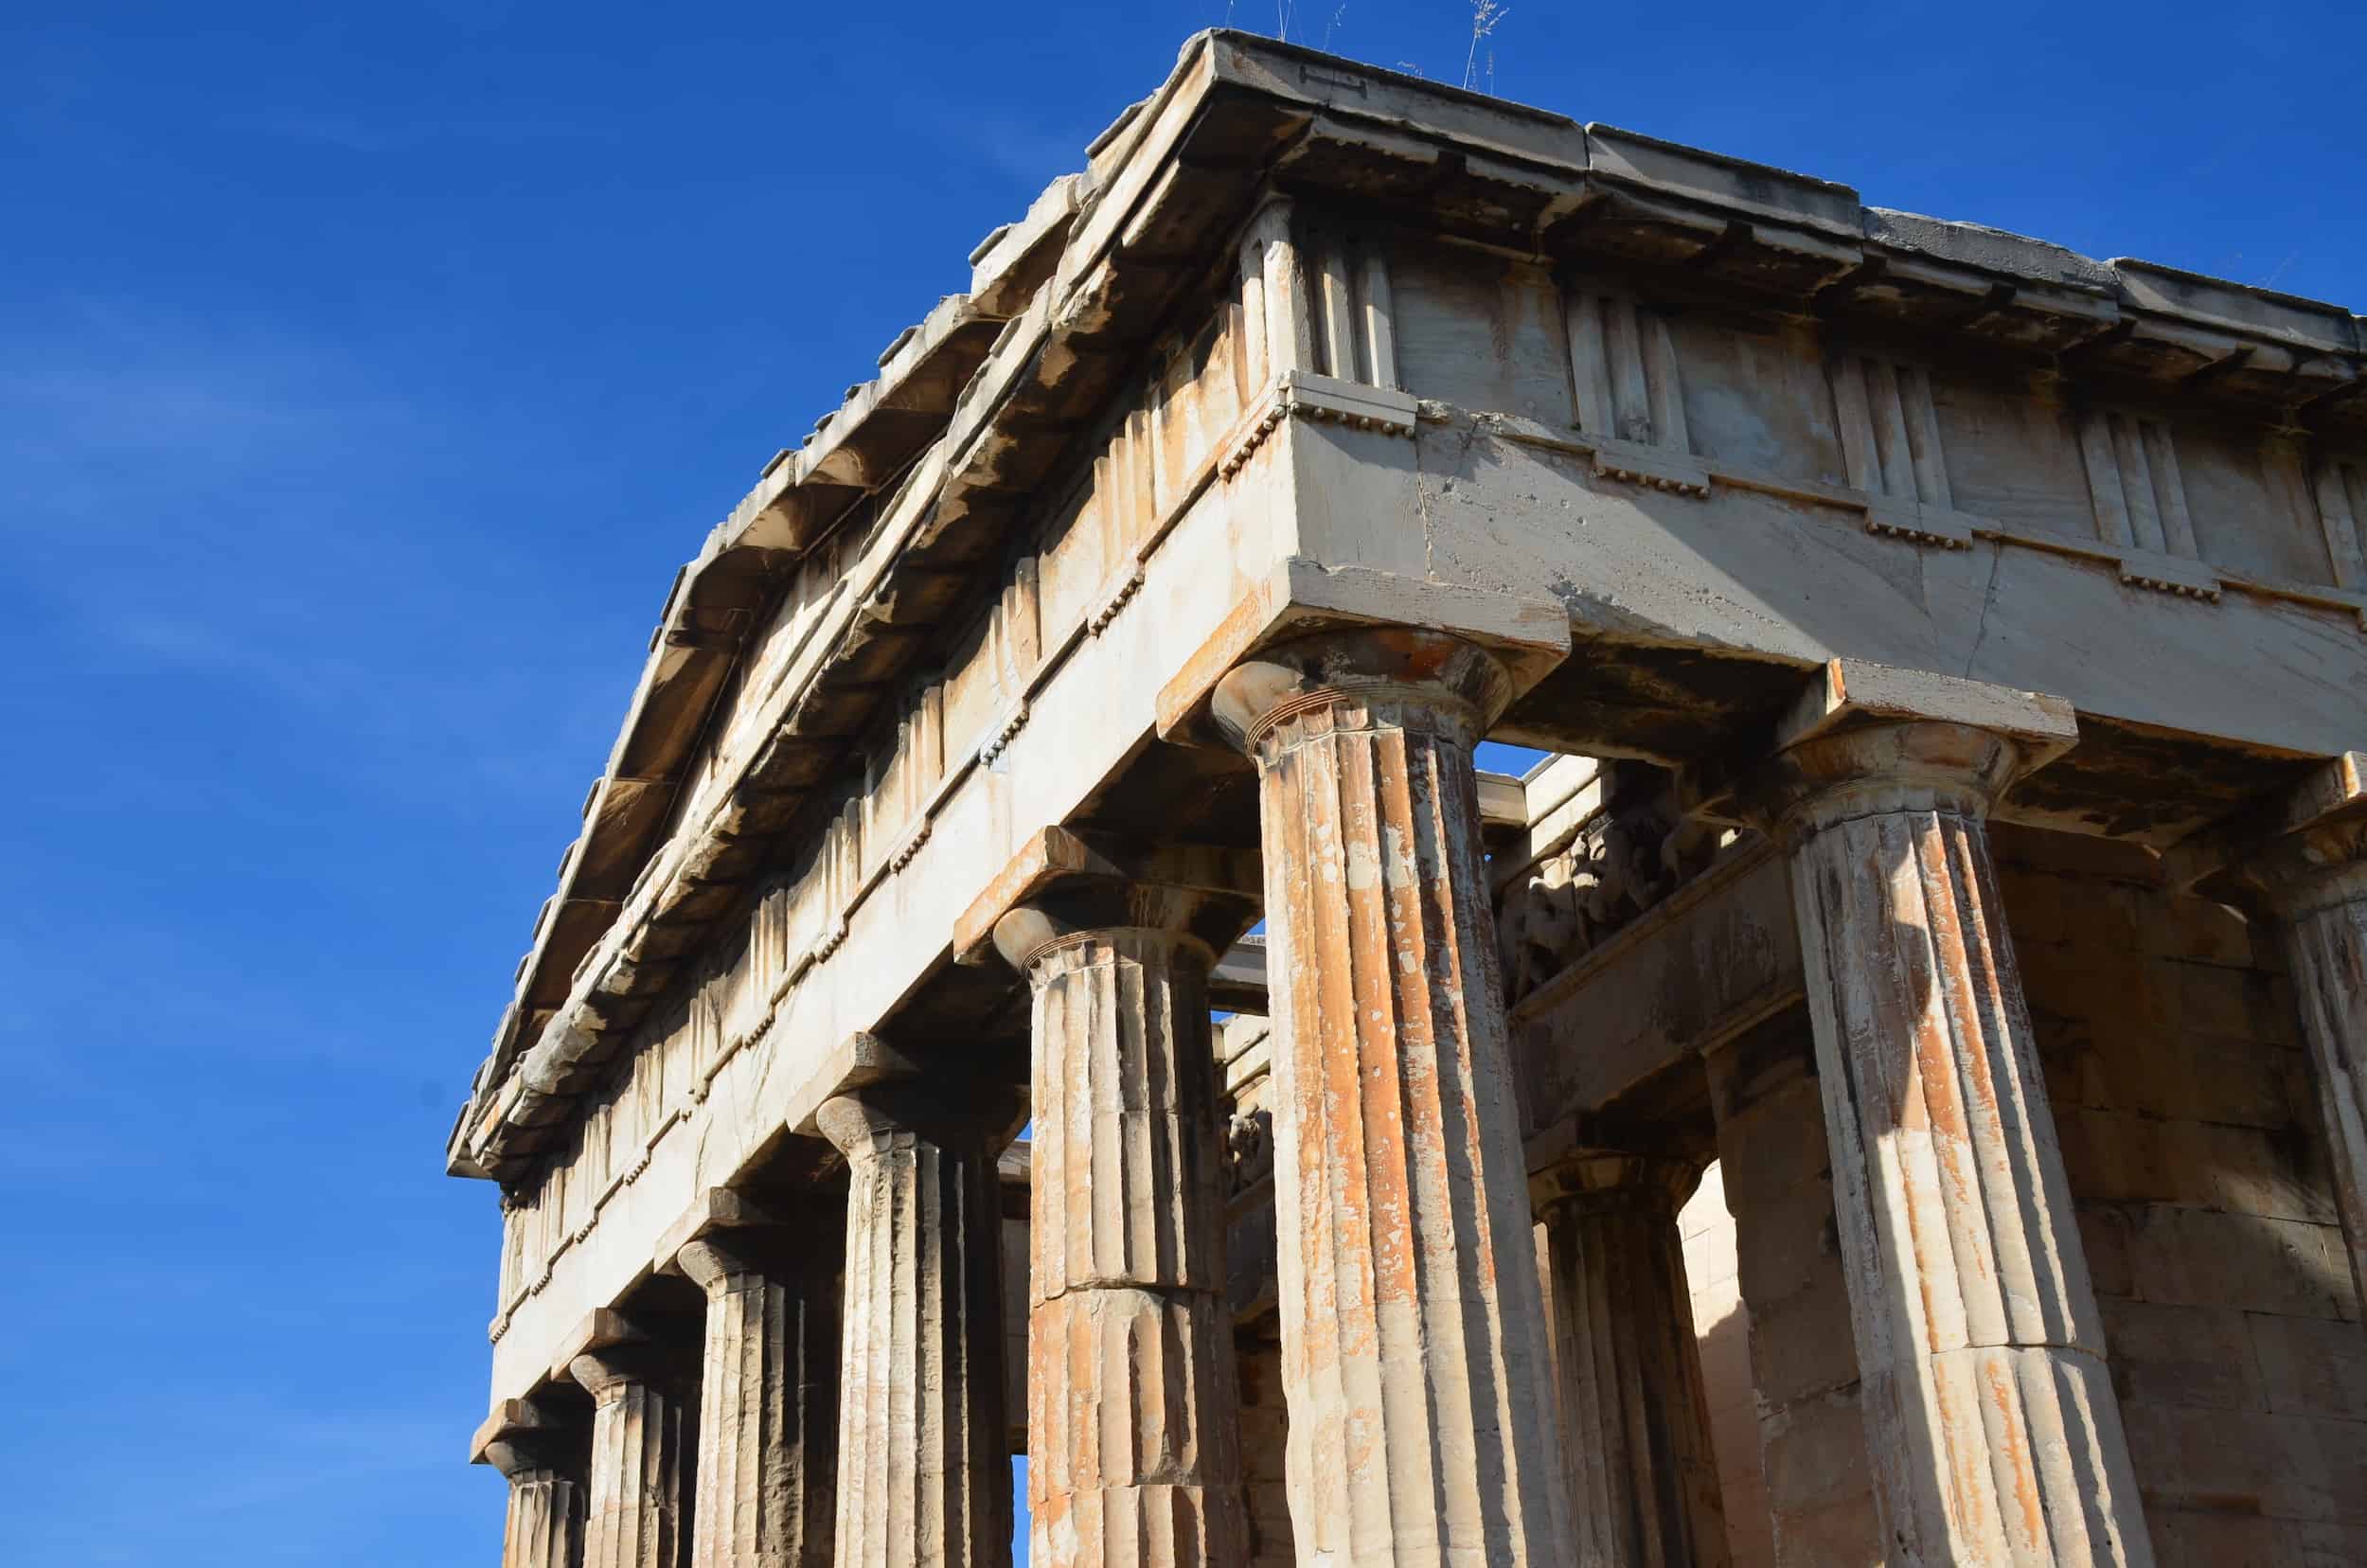 Southwest corner of the Temple of Hephaestus at the Ancient Agora of Athens